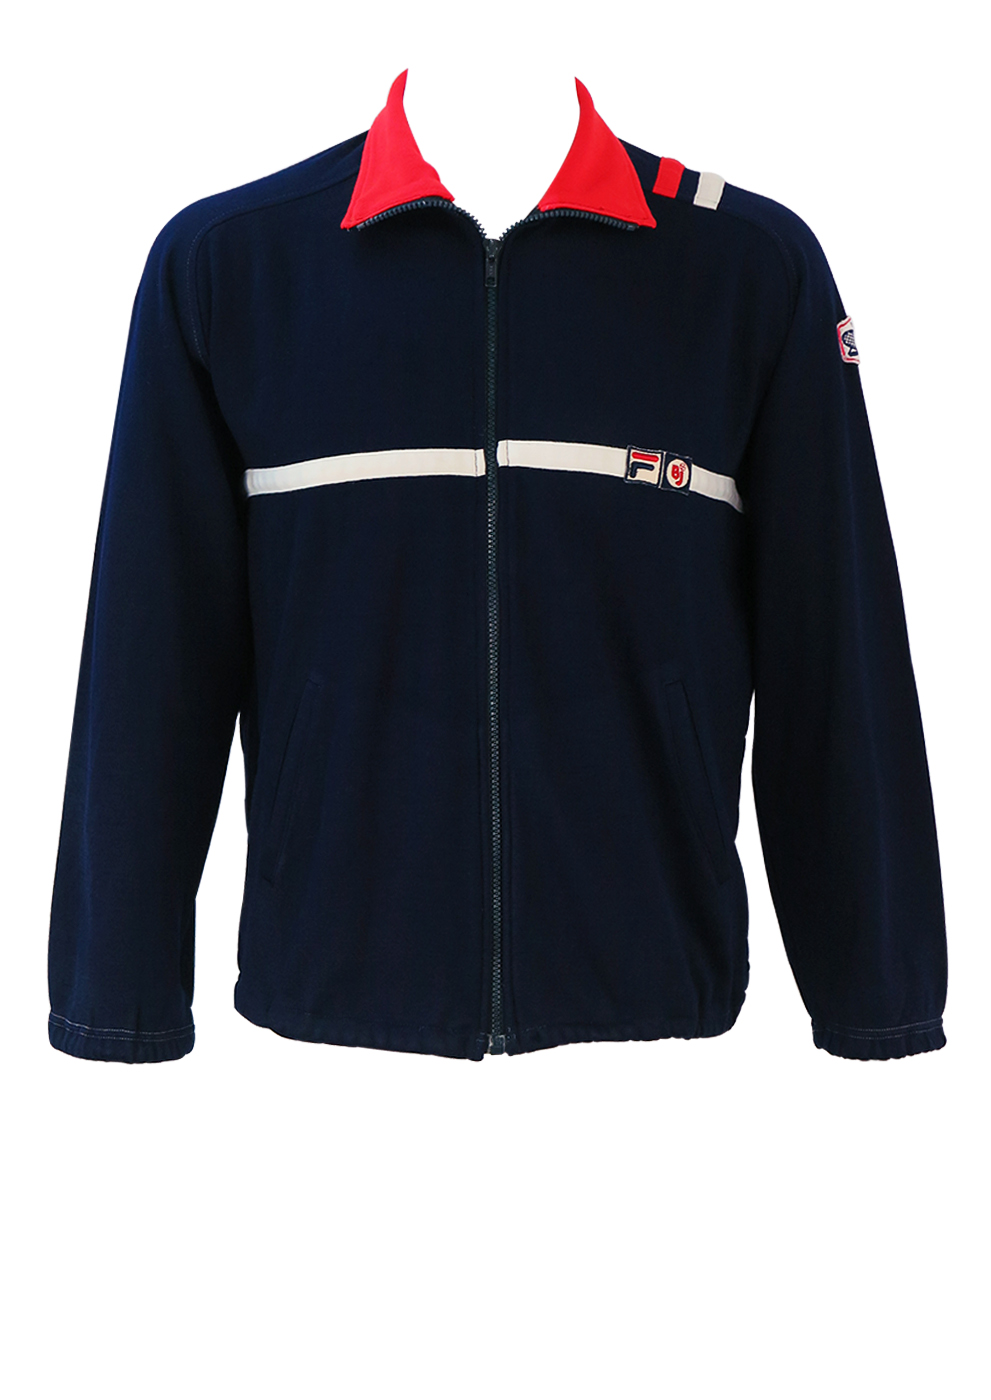 red and blue fila jacket